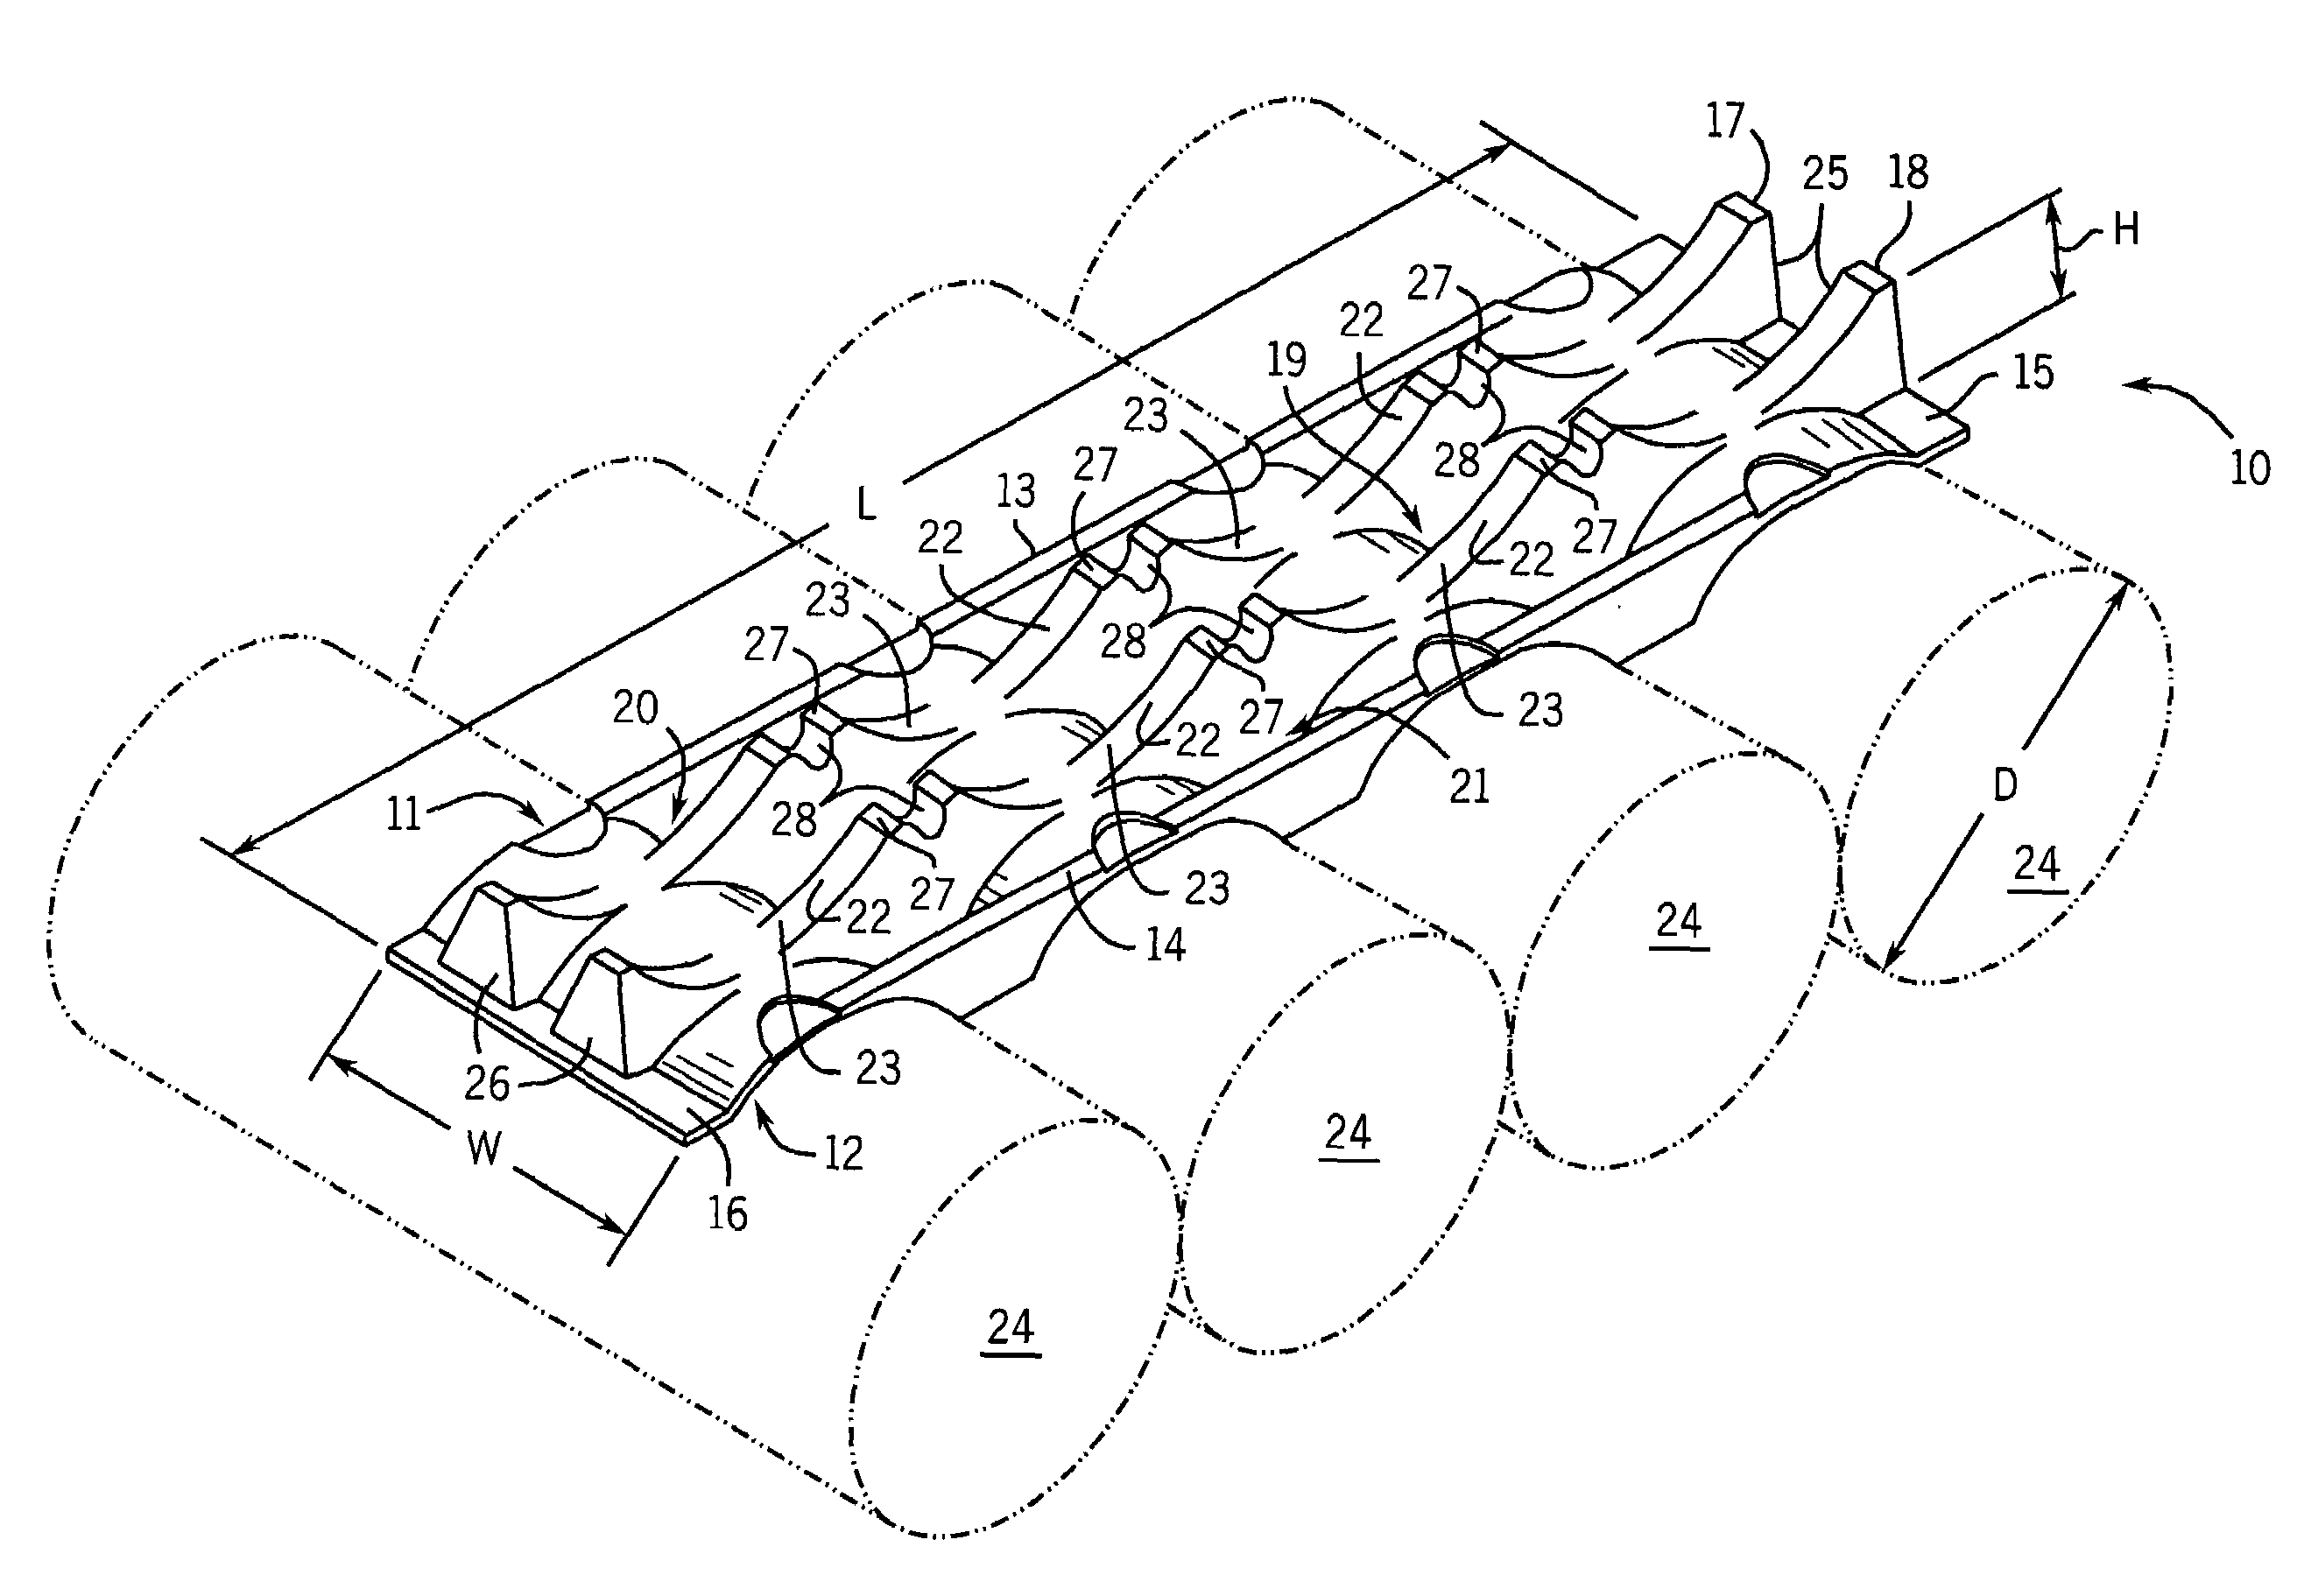 Two-sided roll support with multiple ribs